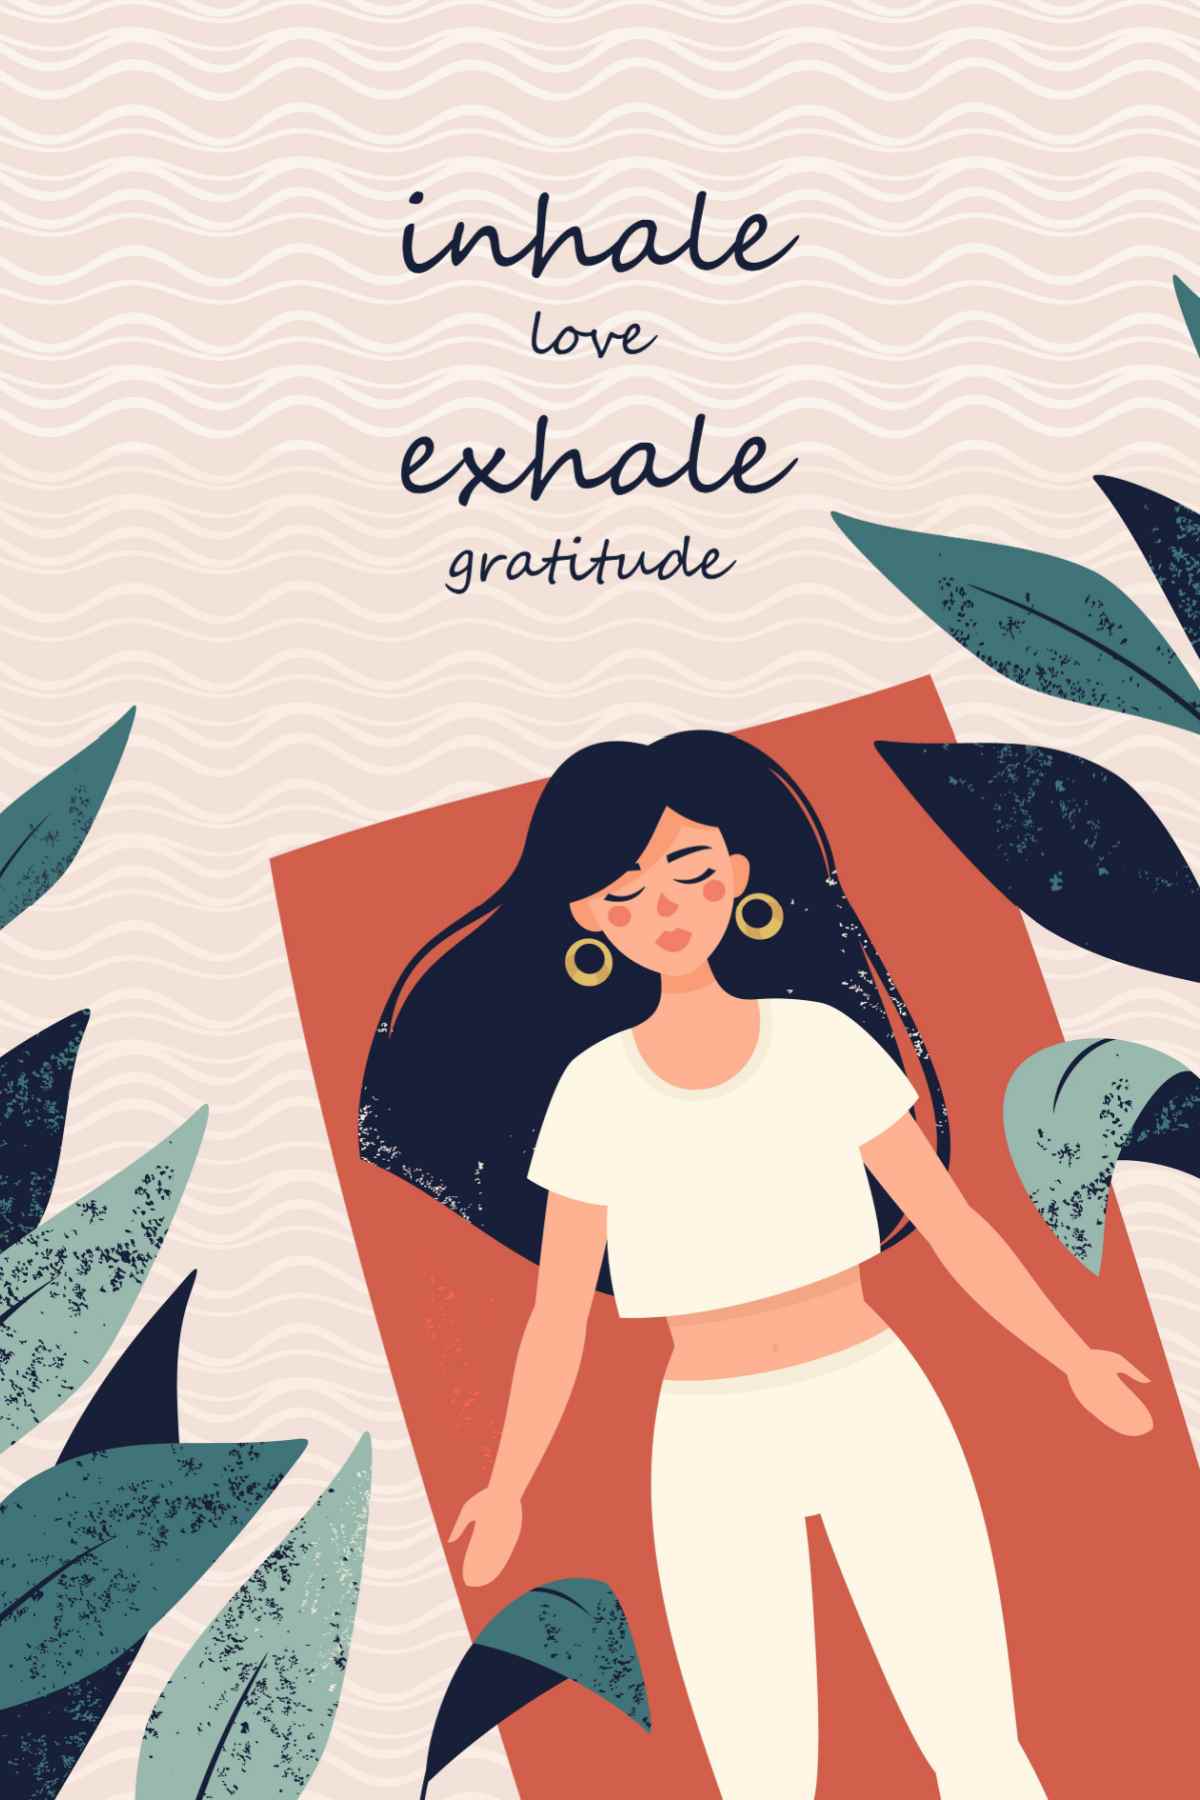 A graphic of a woman doing yoga, lying on an orange yoga mat in shavasana surrounded by plants with a text overlay that reads "inhale love, exhale gratitude".